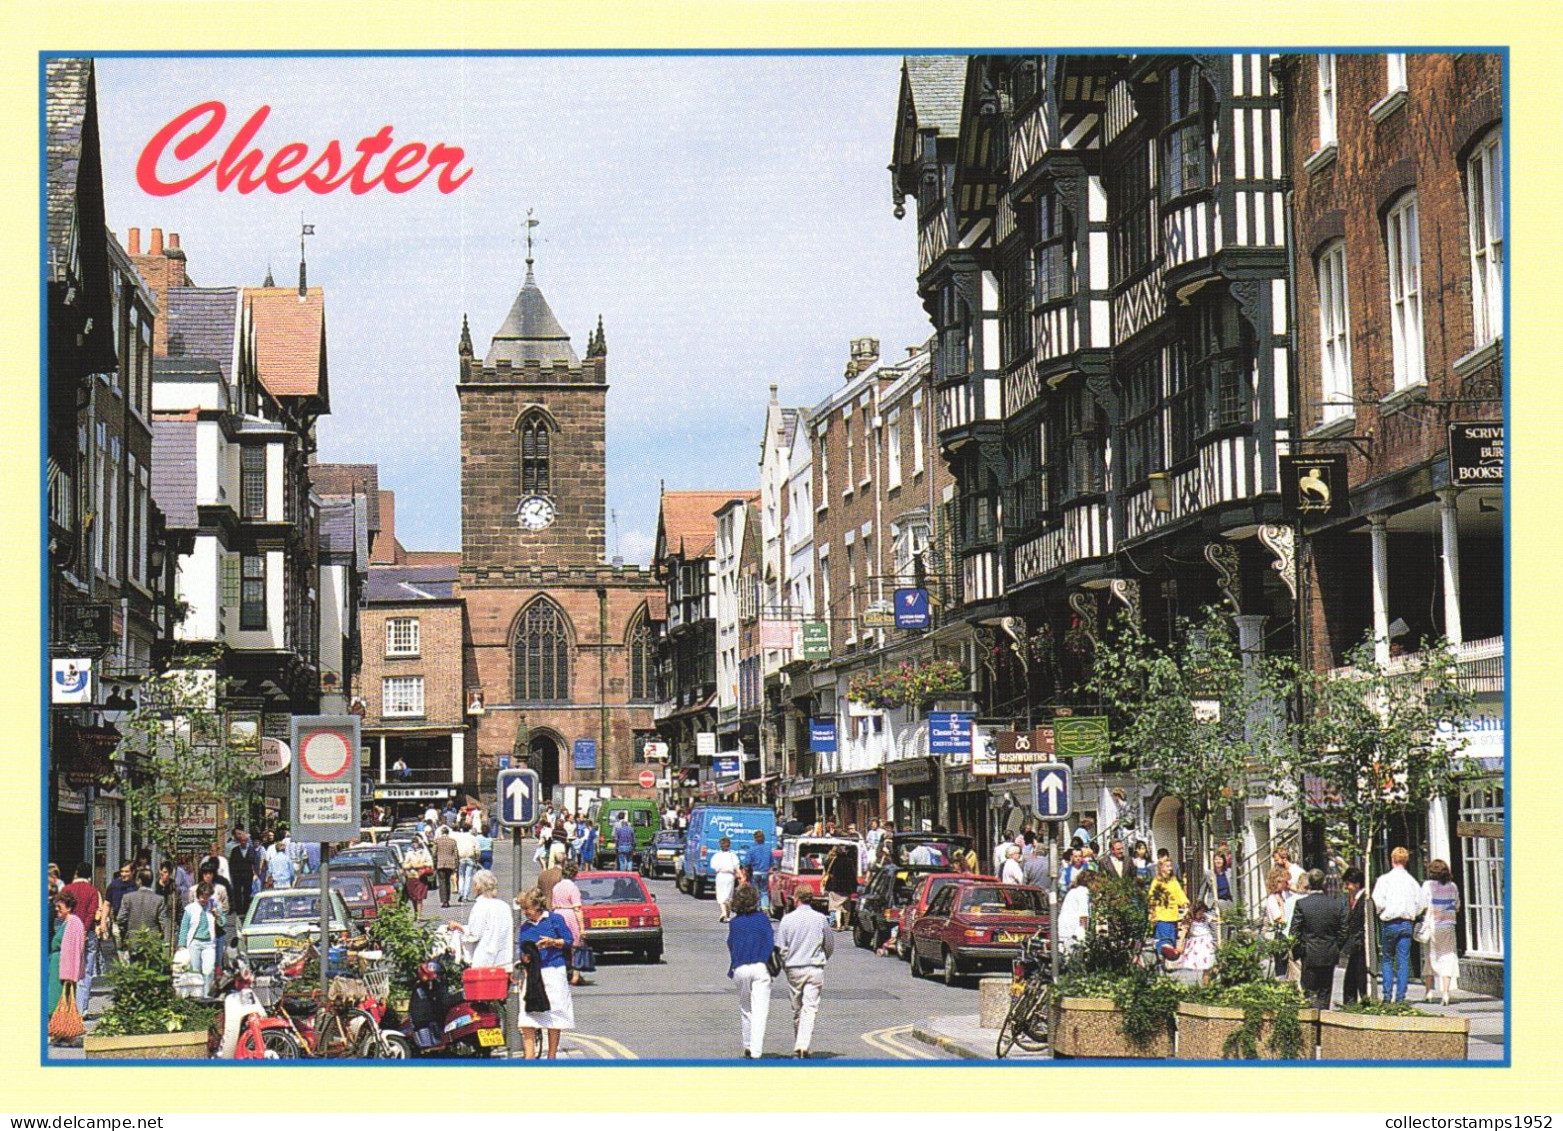 CHESTER, ARCHITECTURE, CHURCH, TOWER WITH CLOCK, CARS, UNITED KINGDOM, POSTCARD - Chester